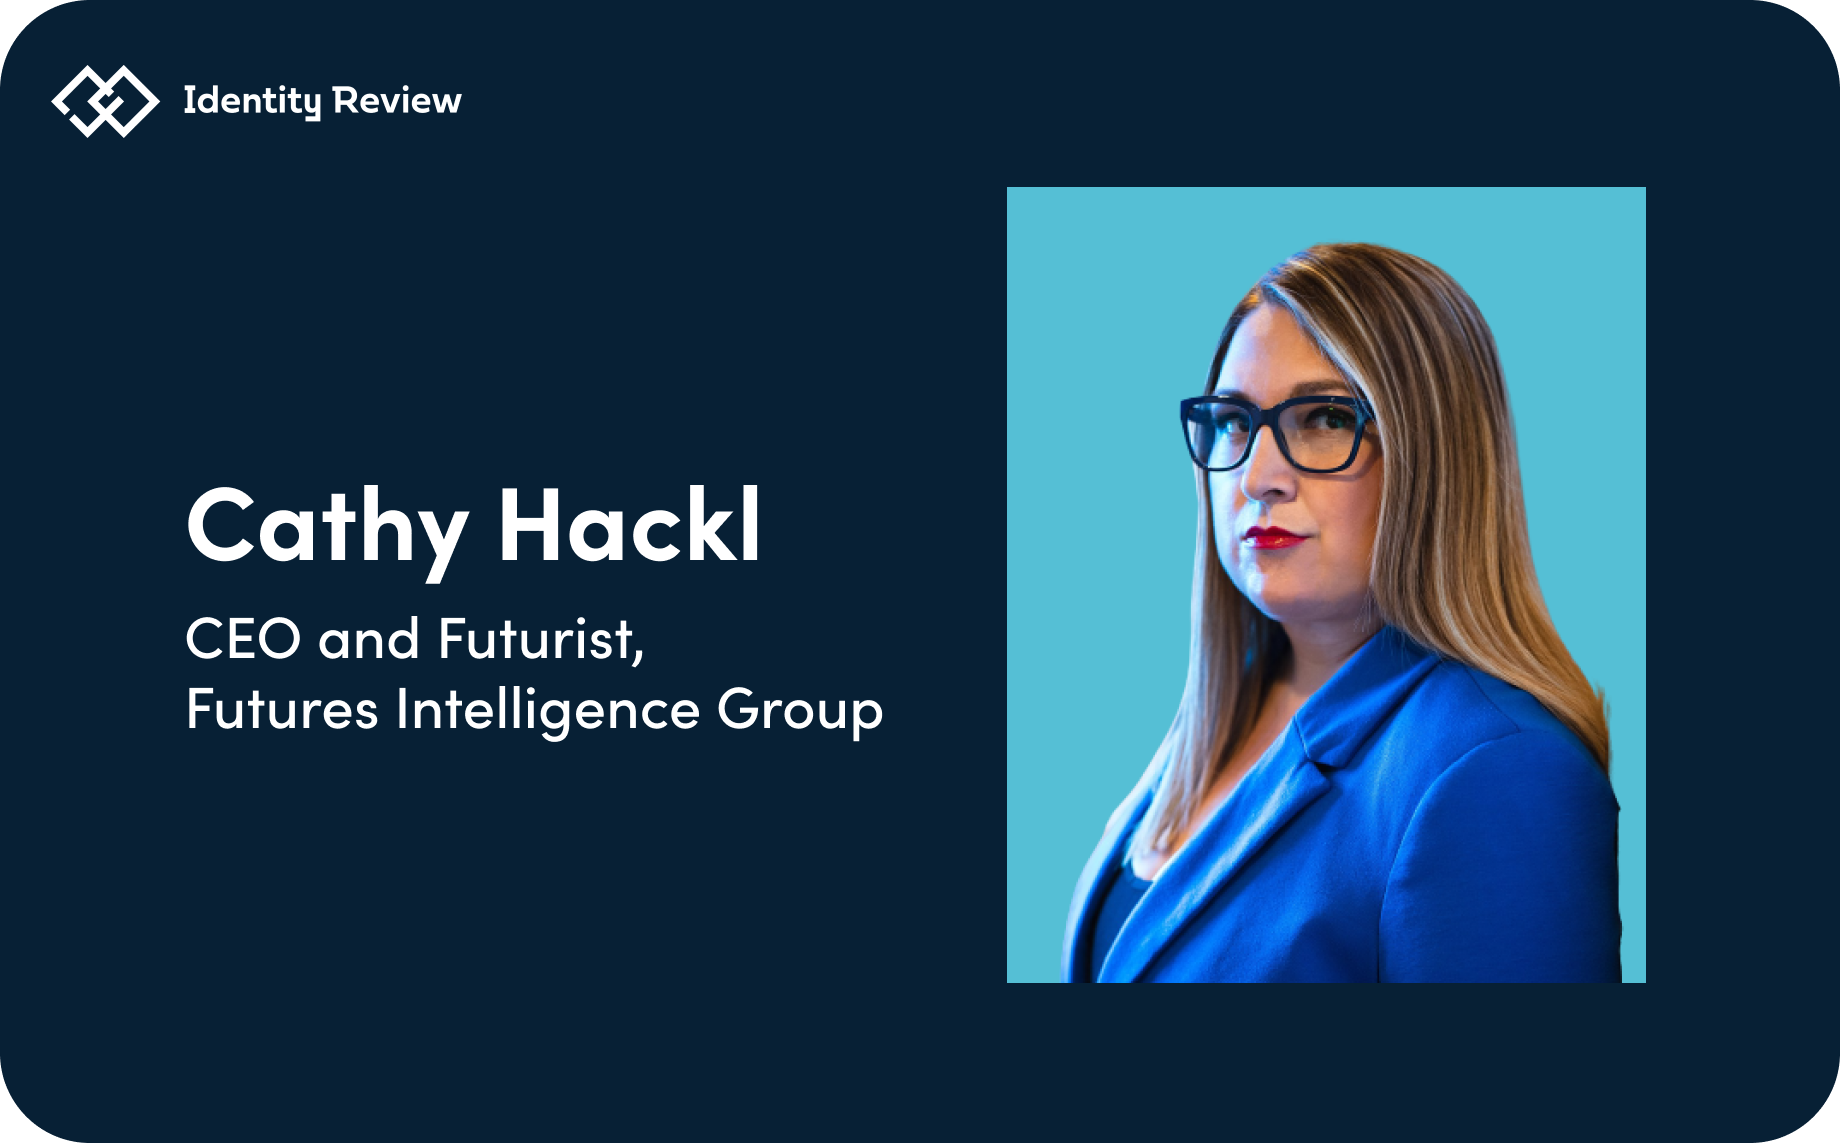 1. Cathy Hackl, CEO and Futurist of Futures Intelligence Group